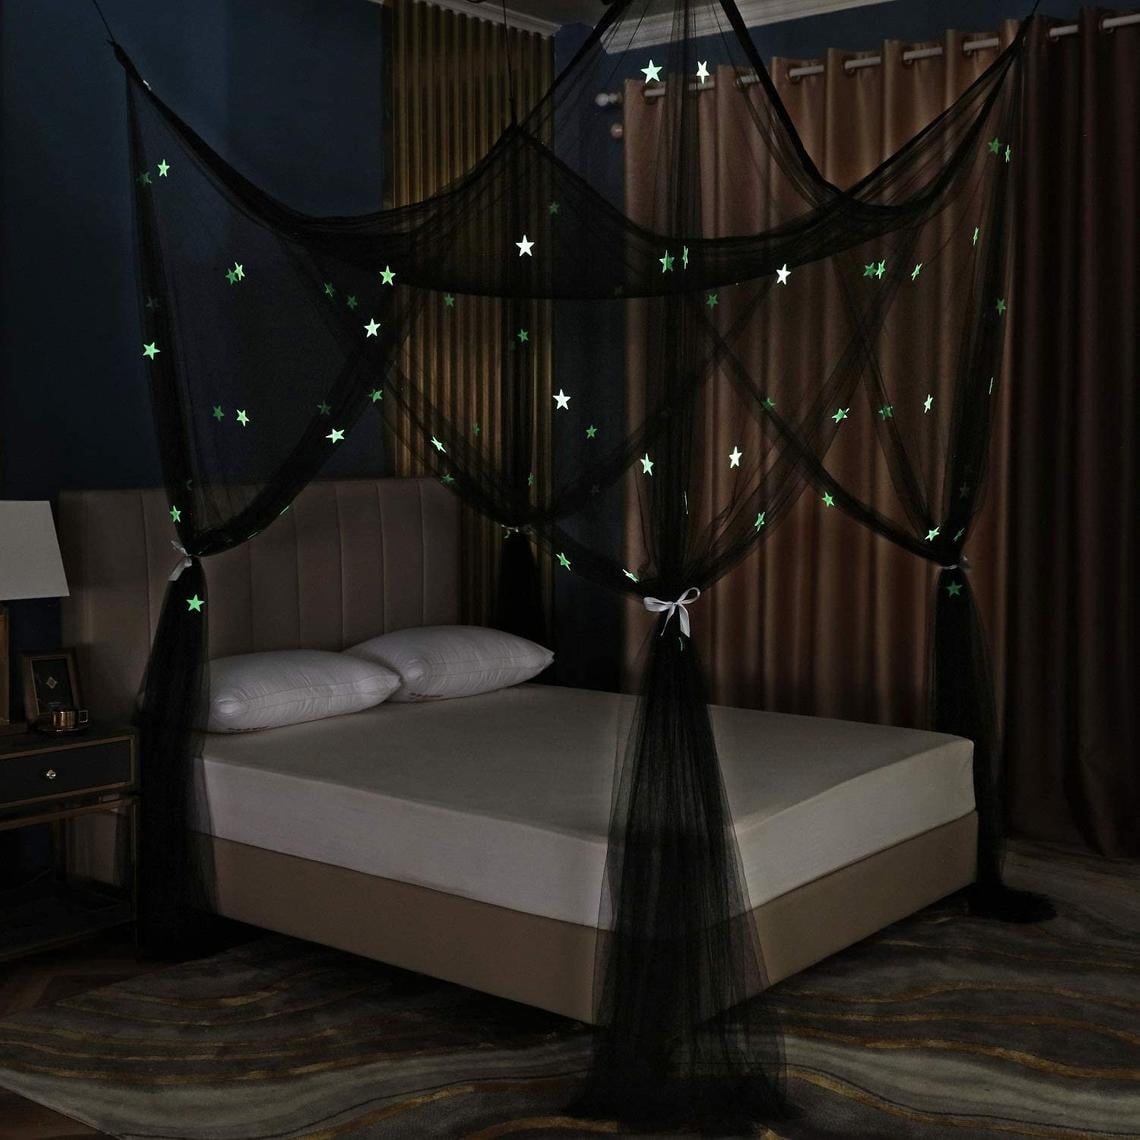 Black 4 Poster Glow In The Dark Bed, Big Four Poster King Size Bed